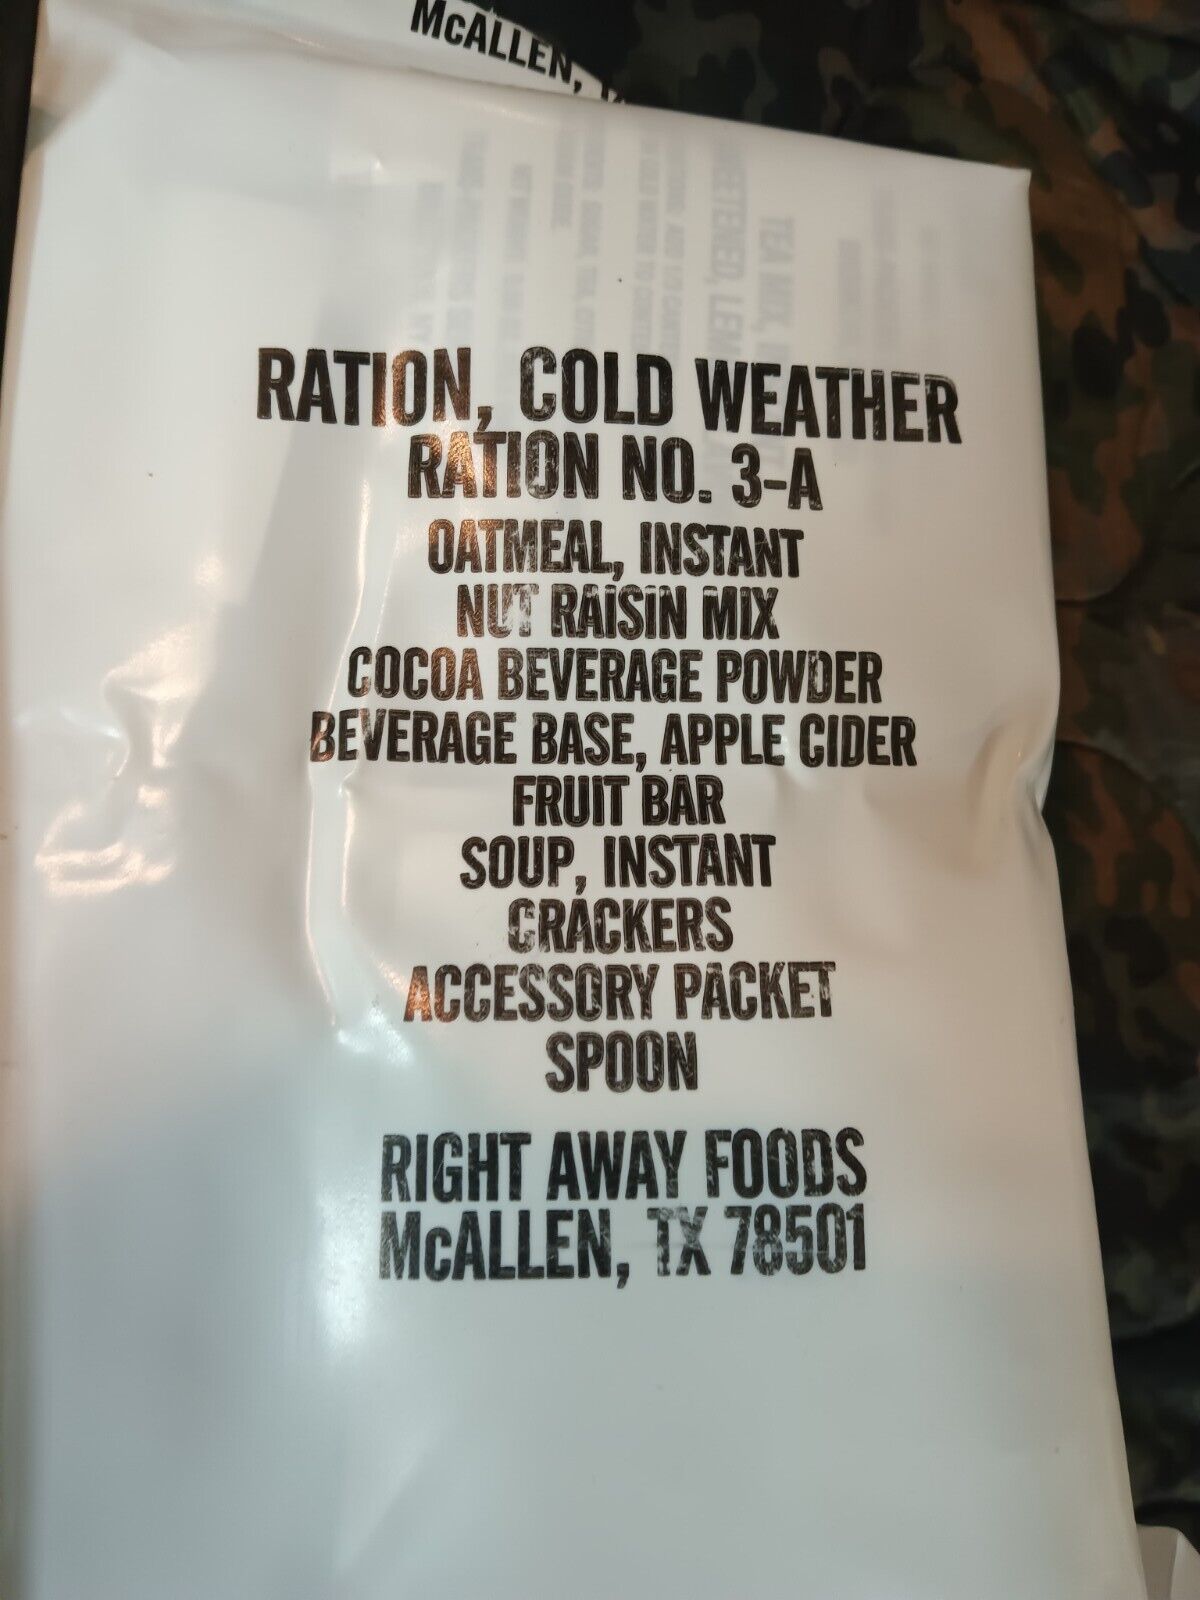 Vintage Right Away Foods Ration Cold Weather Meal Menu 3-A 1x